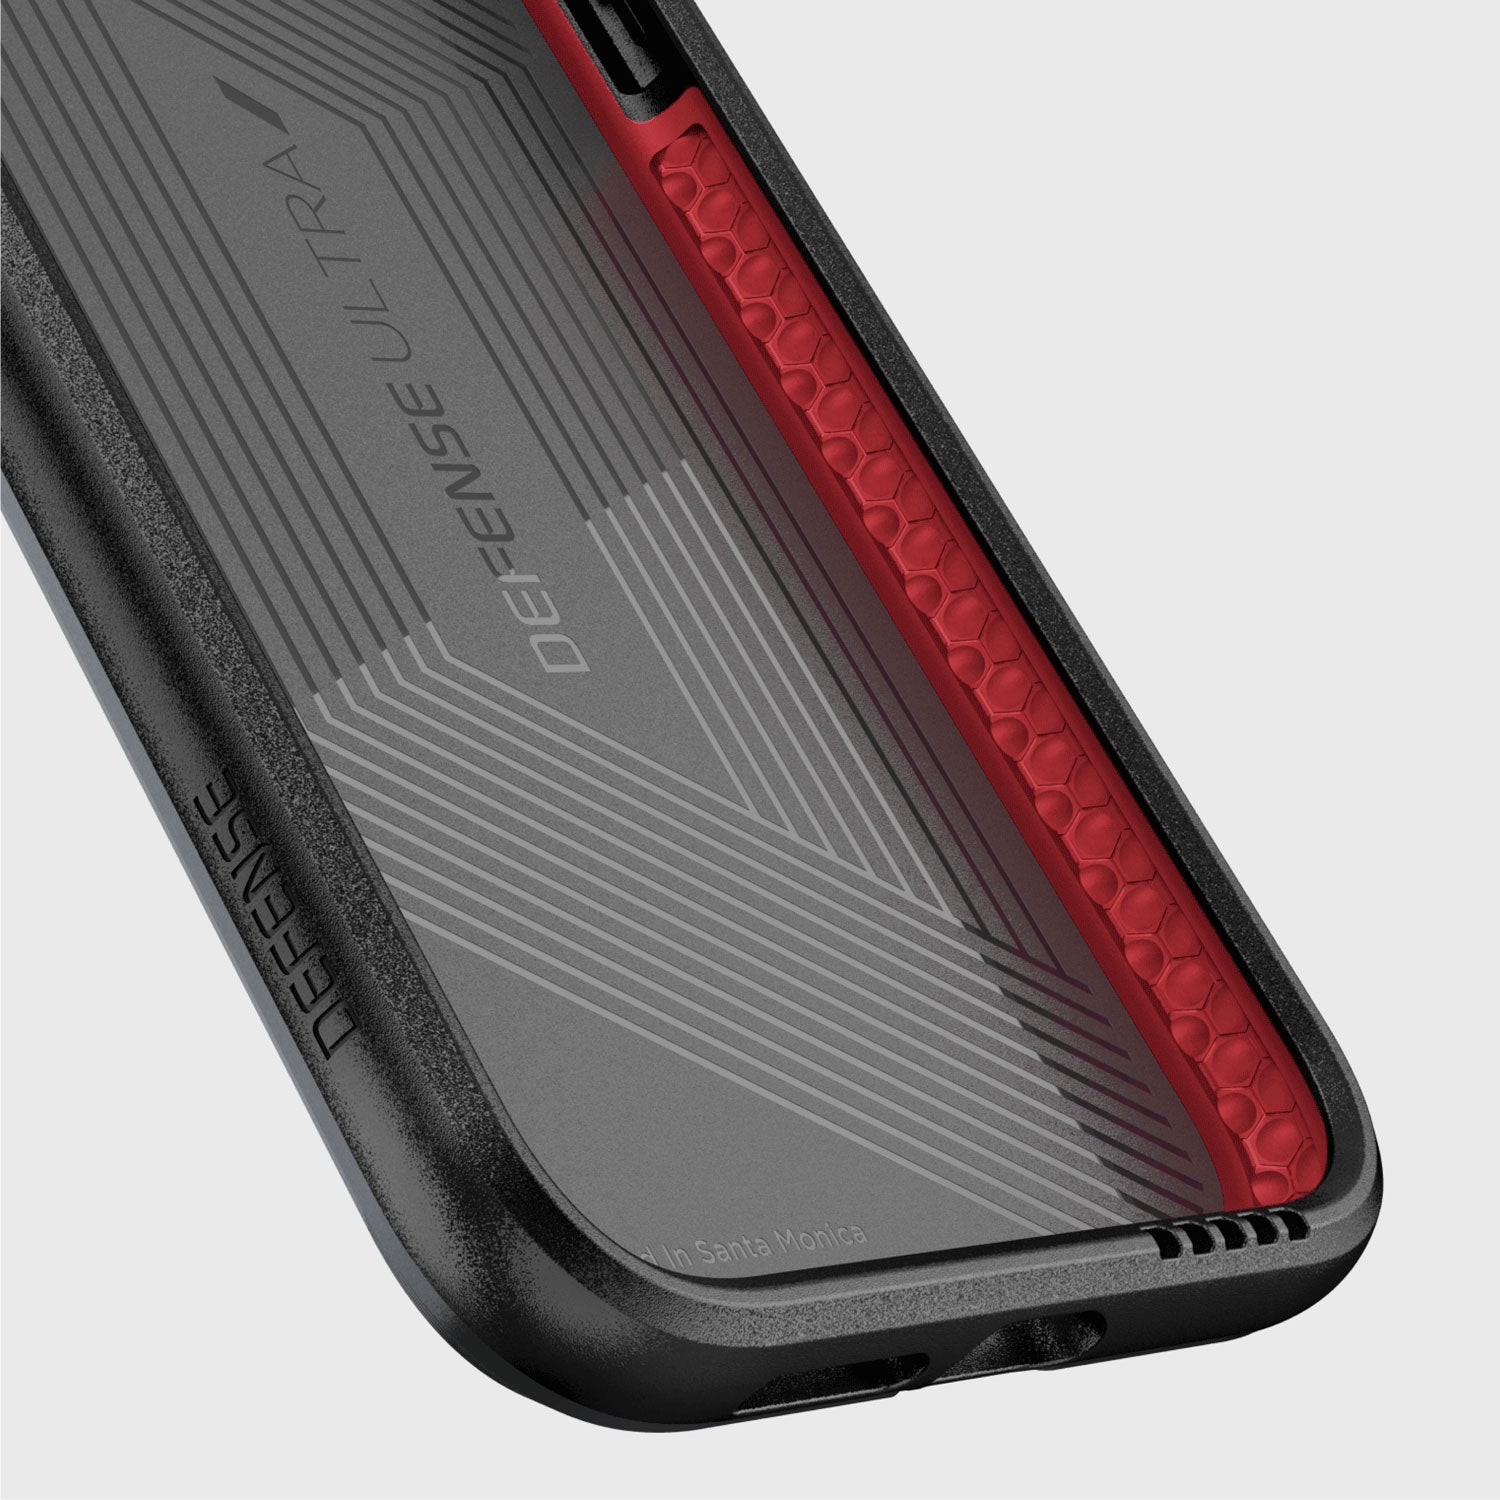 The ULTRA iPhone XR case from Raptic provides device protection in a sleek black and red design.